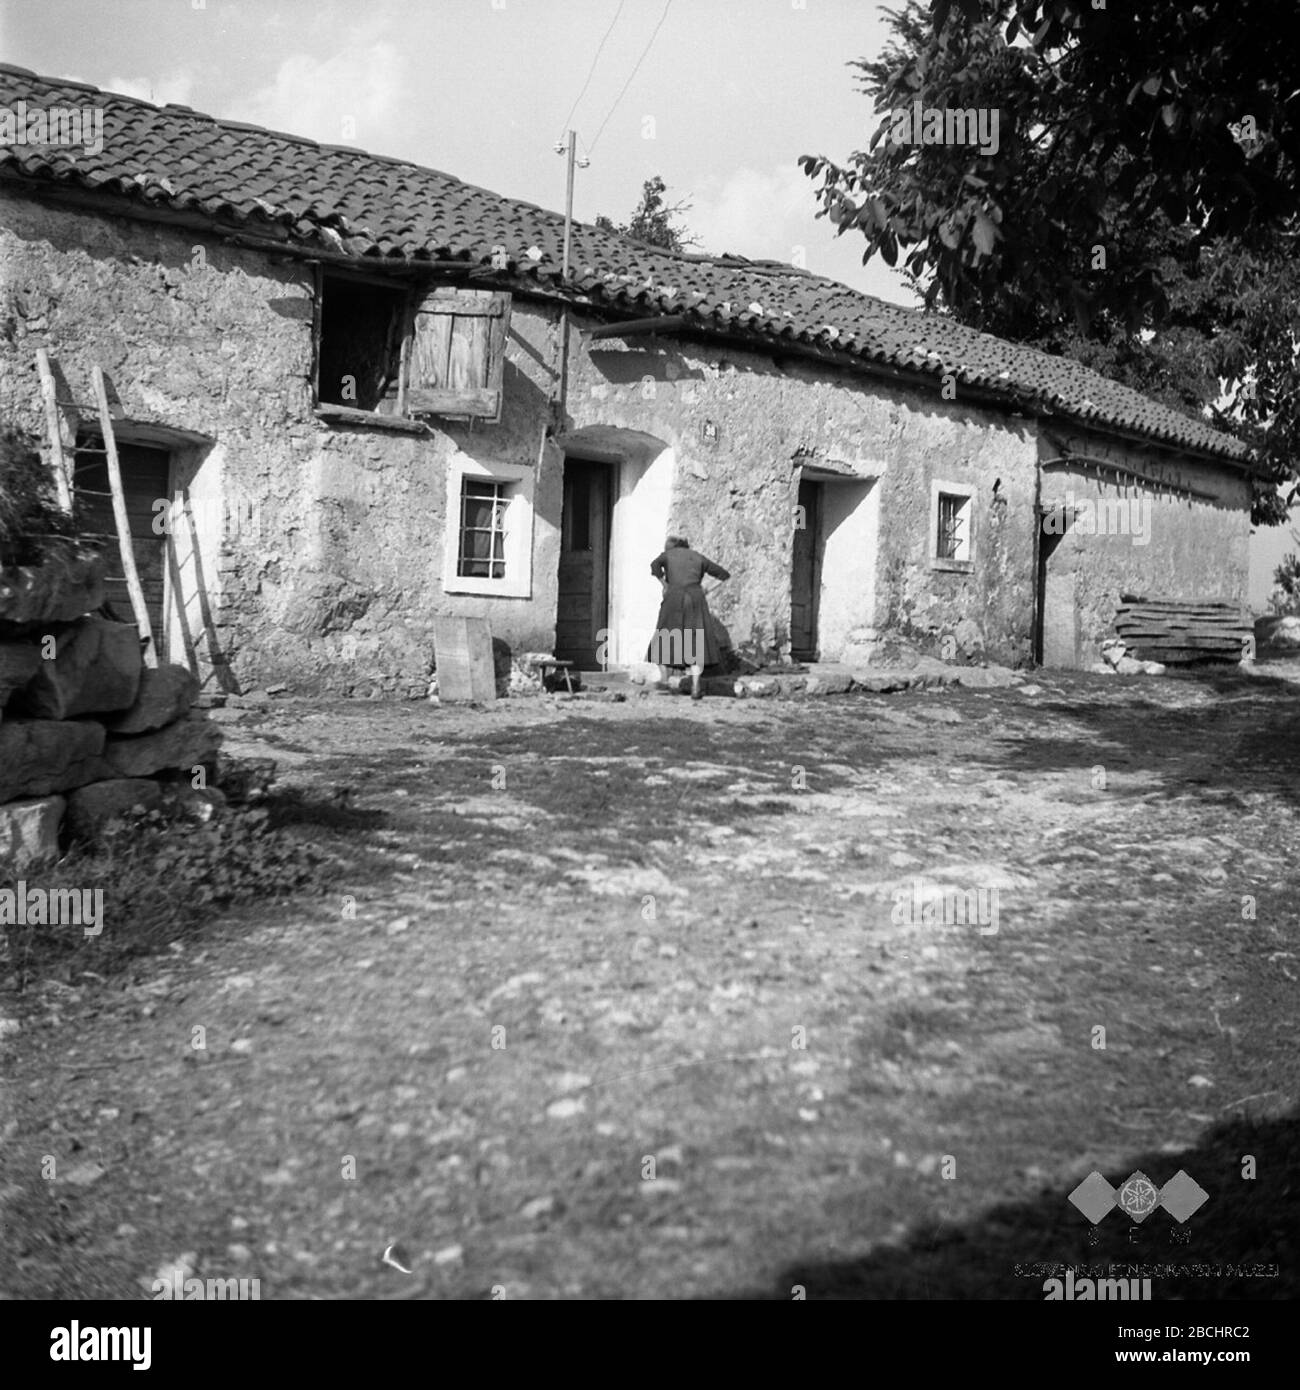 'Slovenščina: Štala (hlev) in hiša, pri Matanjovih, Račice.; August 1955; This image or media is available on the Slovenian Ethnographic Museum's websiteunder the reference number brkini/f0000012487.This tag does not indicate the copyright status of the attached work. A normal copyright tag is still required. See Commons:Licensing. English | slovenščina | +/−; Fanči Šarf  (1924–)        Description Slovene ethnologist and photographer  Date of birth  1924   Location of birth  Ljubljana   Work period 20th century date QS:P,+1950-00-00T00:00:00Z/7  Authority control  : Q41784719 VIAF: 239813517 Stock Photo